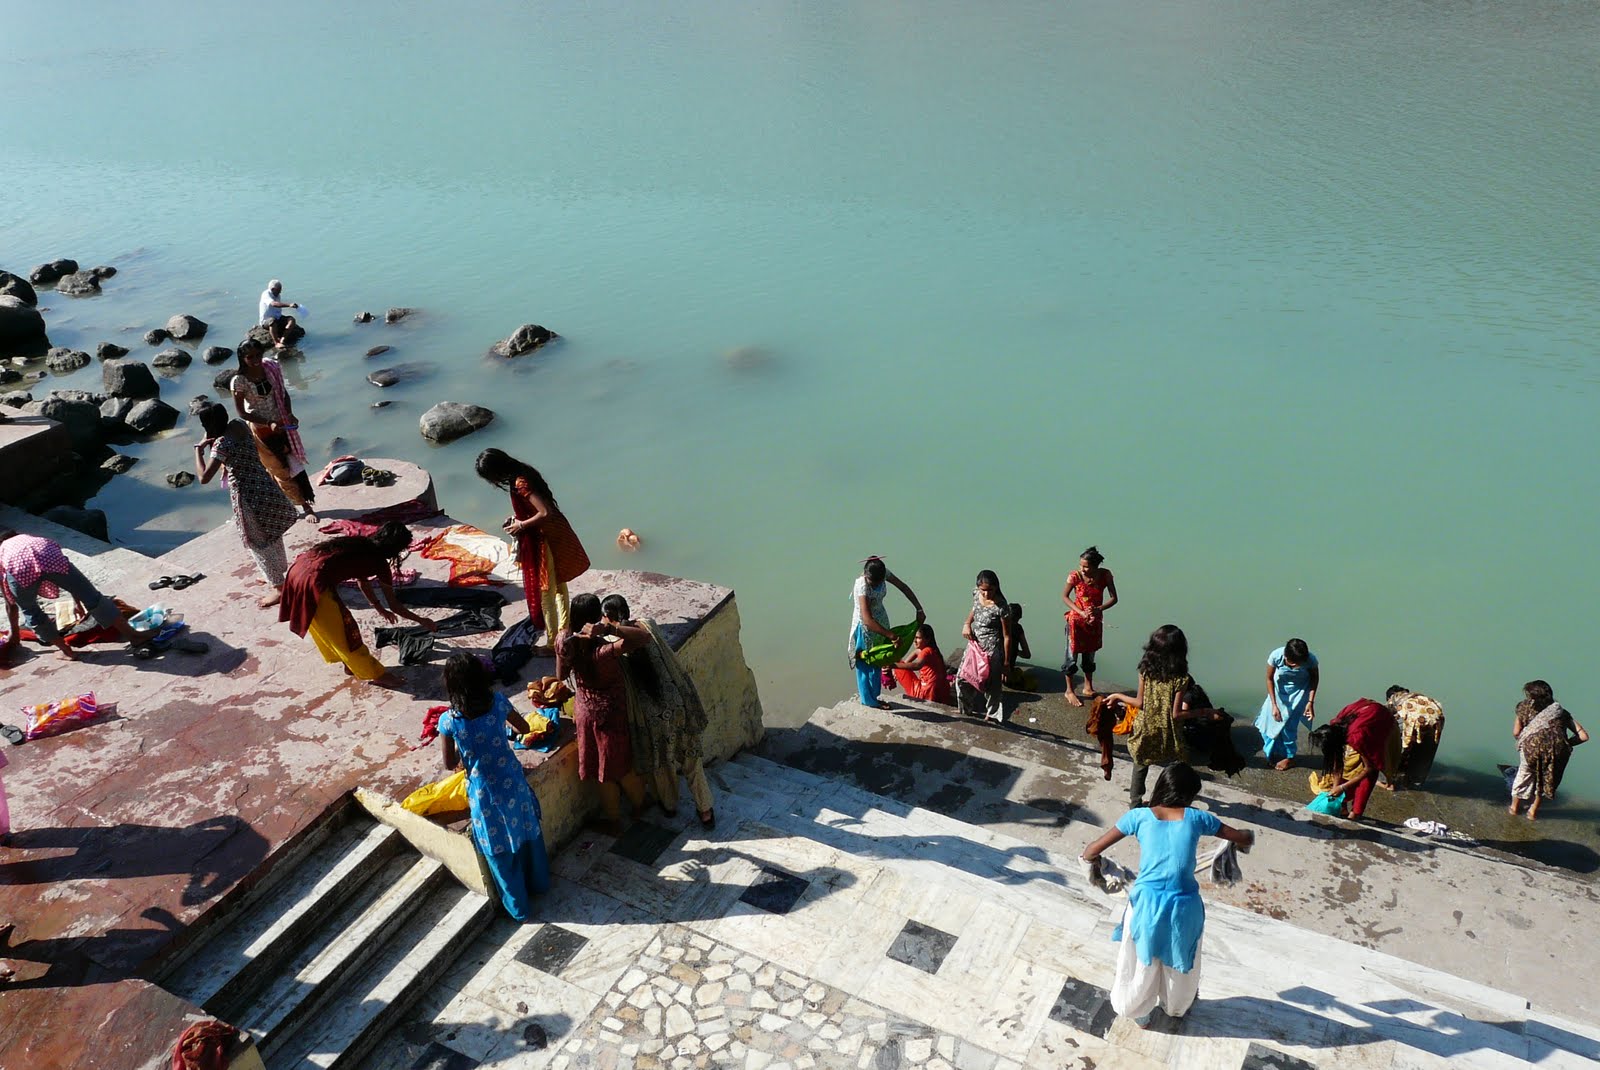 ... ganga gangriver in india « Photo, Picture, Image and Wallpaper